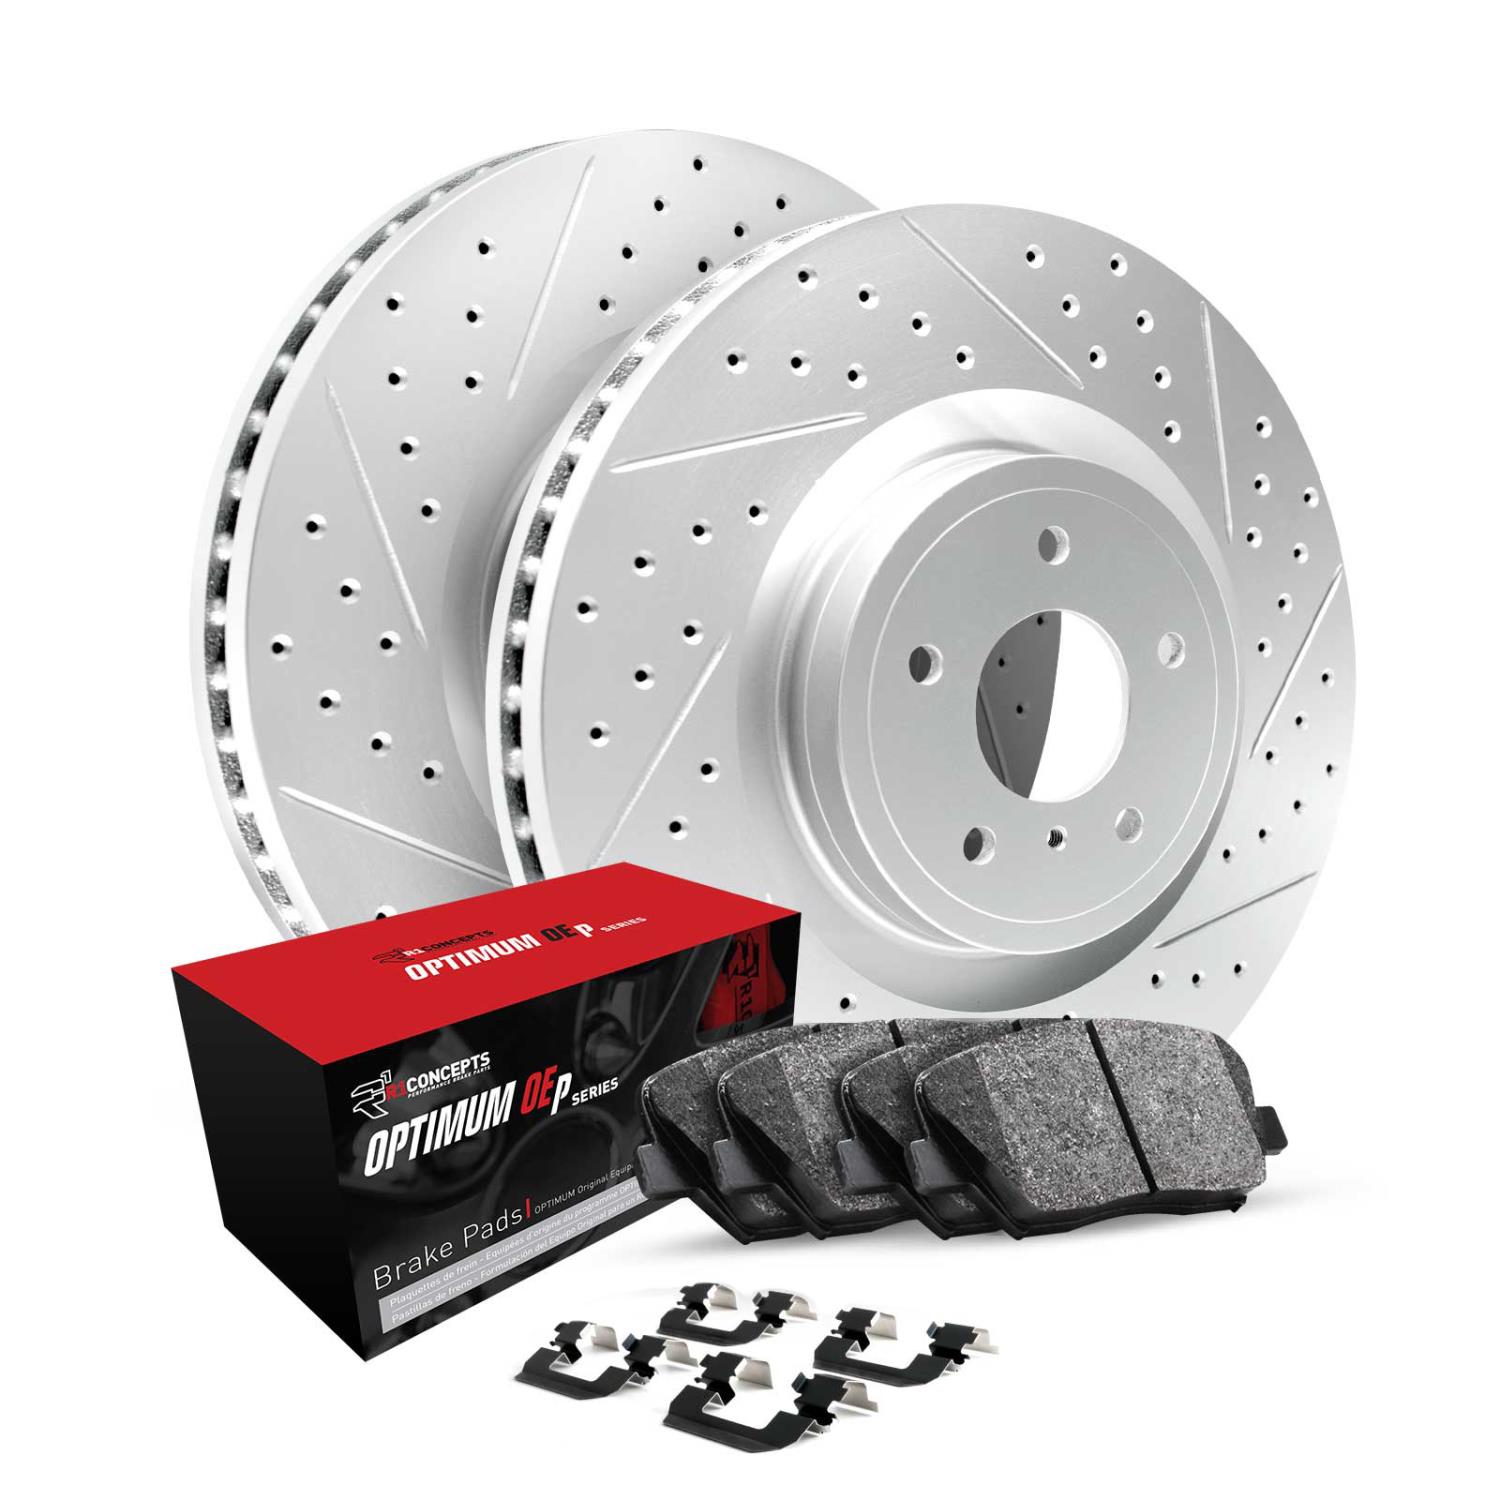 GEO-Carbon Drilled/Slotted Rotors w/Optimum OE Pads/Hardware, 2015-2020 Fits Multiple Makes/Models, Position: Rear